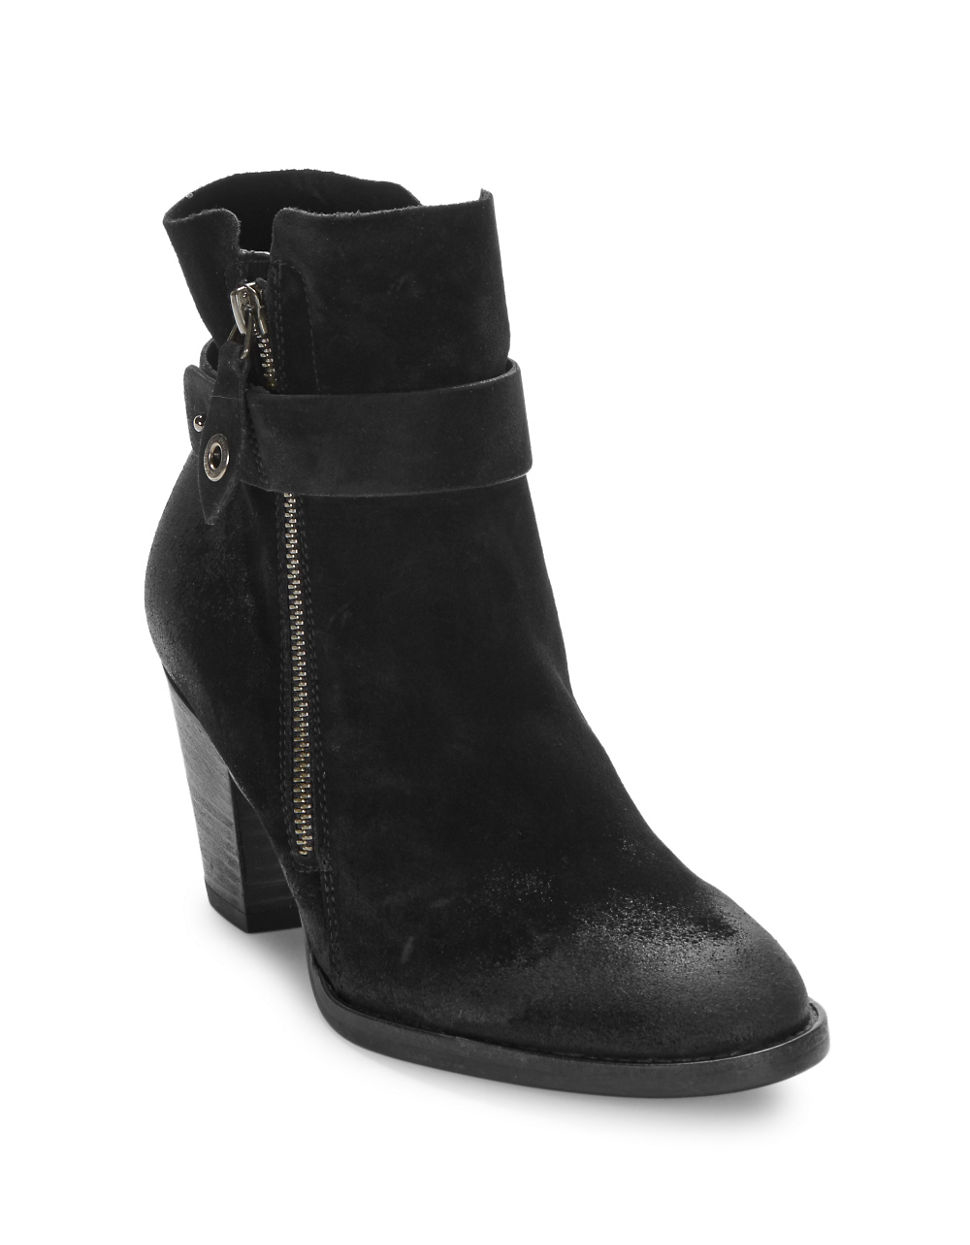 Paul Green Dallas Suede Ankle Boots in Black - Lyst